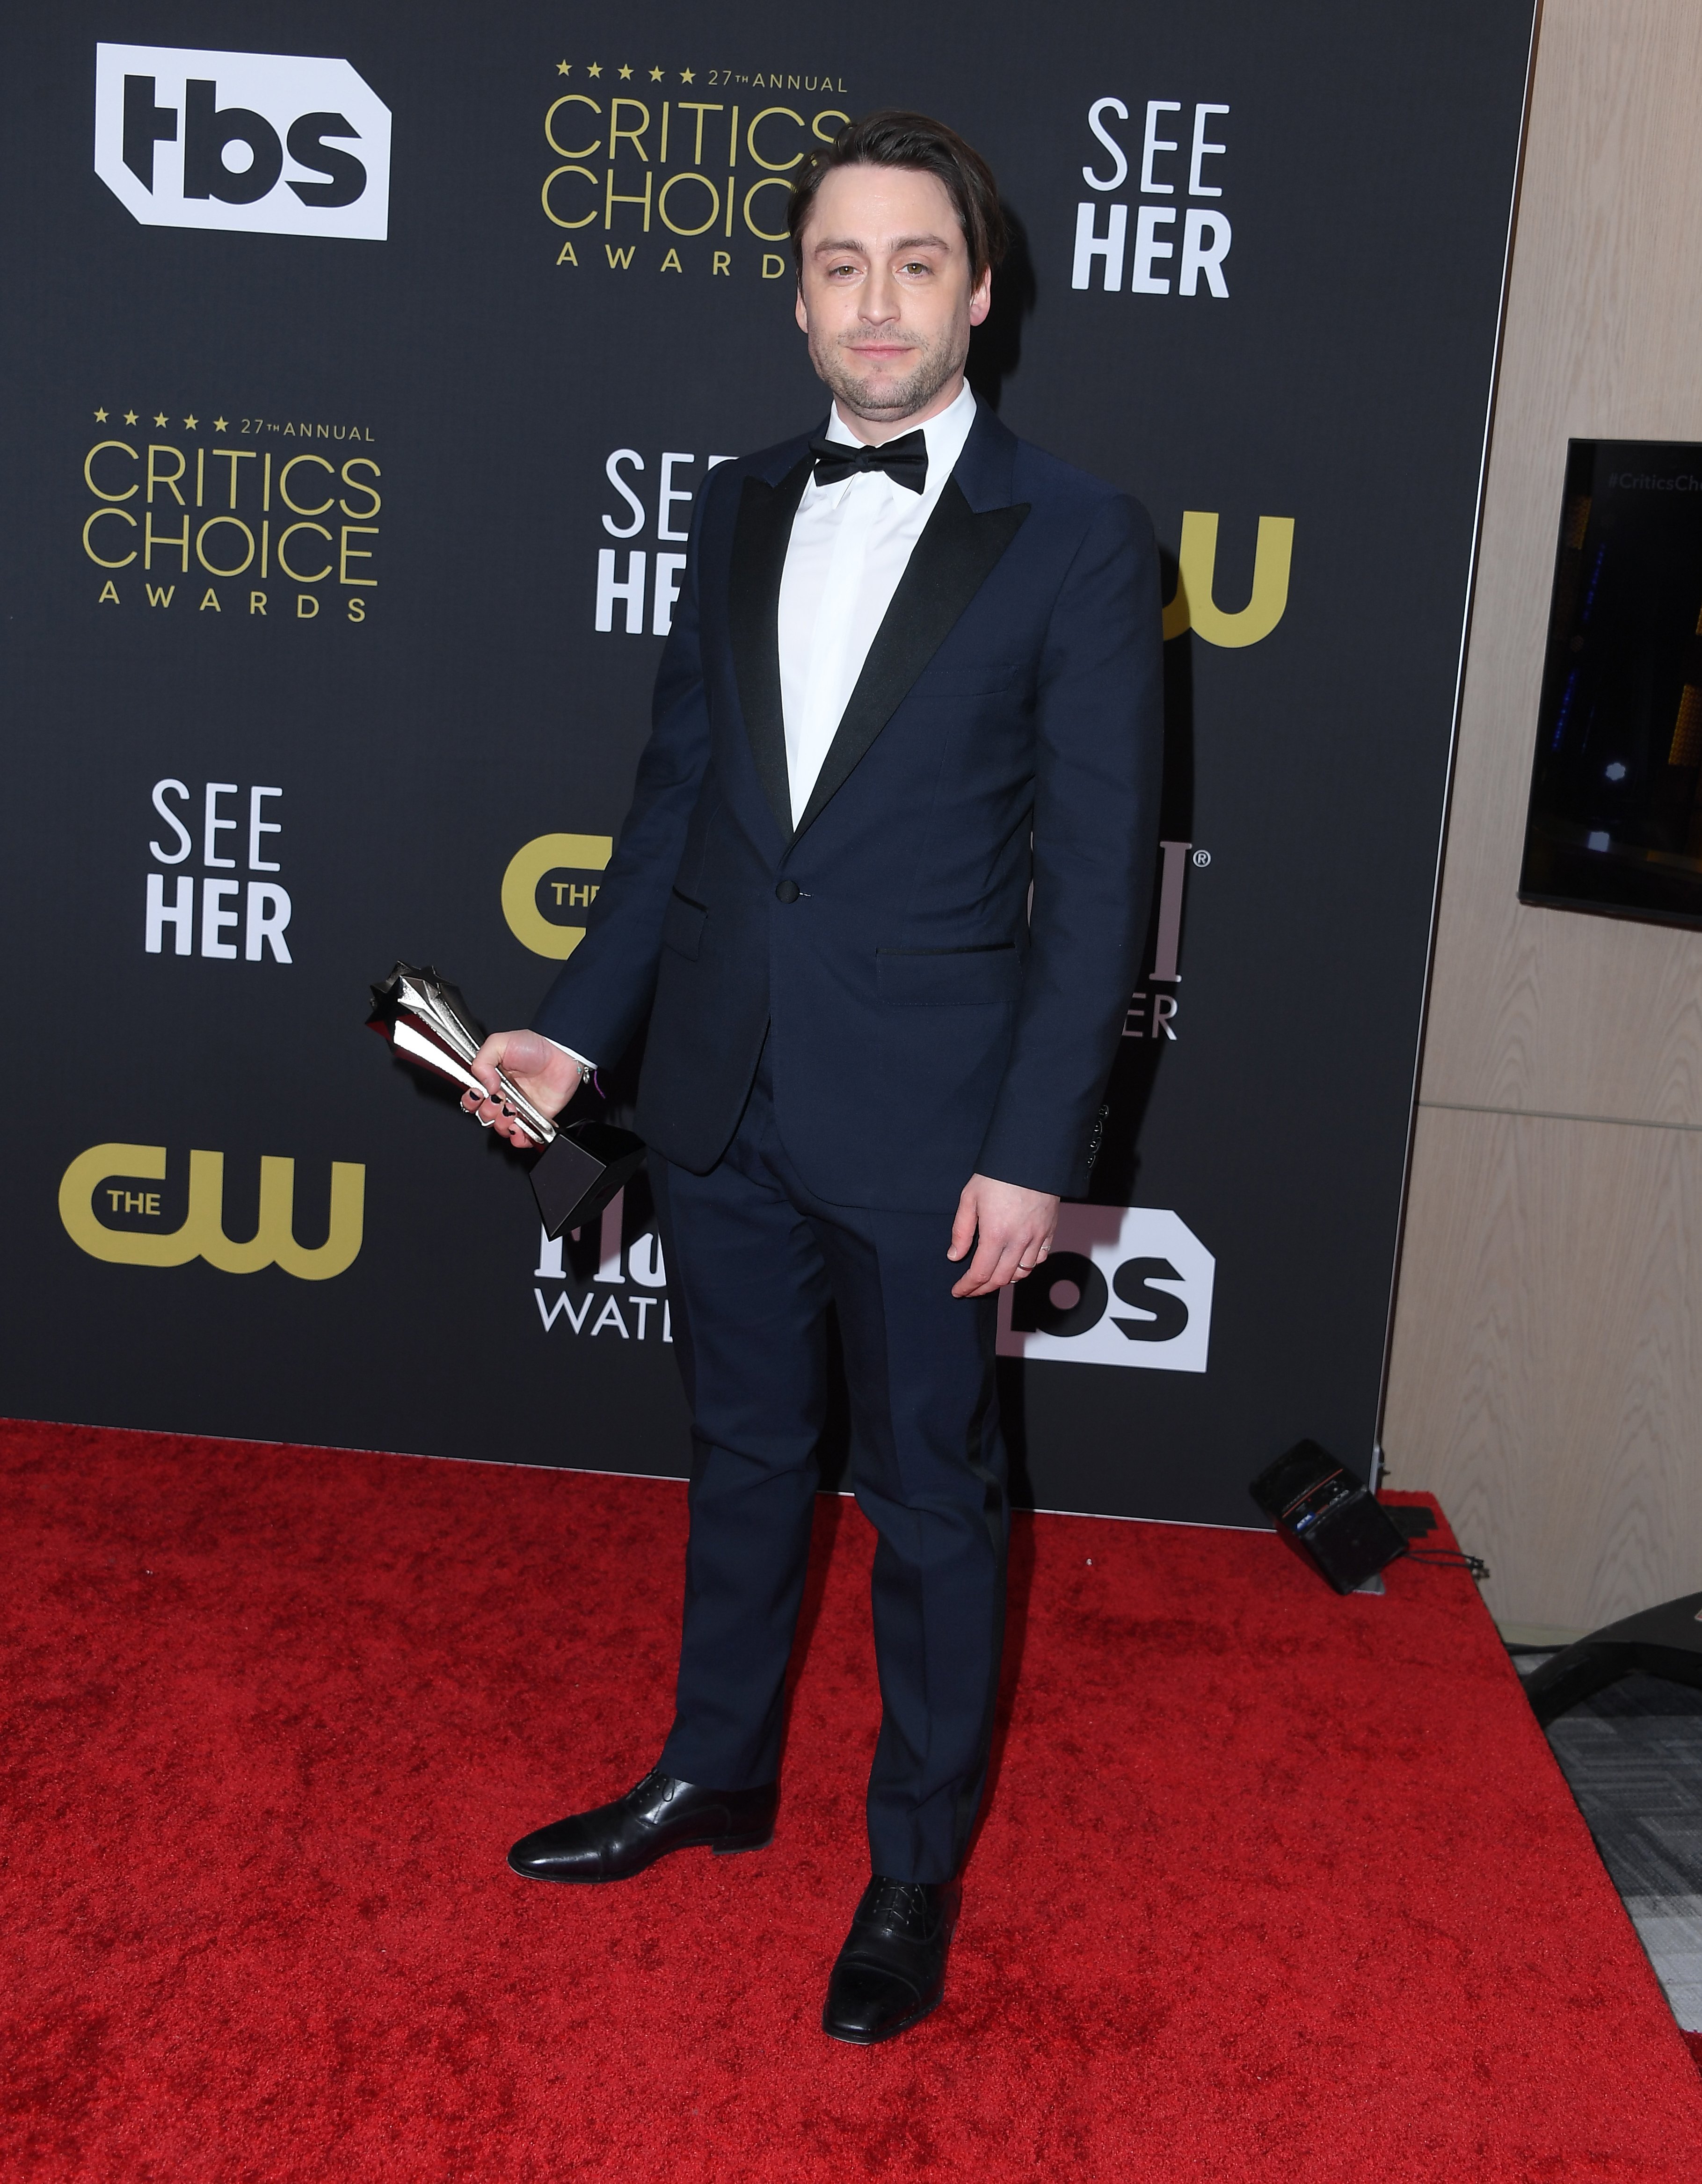 Kieran Culkin Poses at the 27th Annual Critics Choice Awards at Fairmont Century Plaza on March 13, 2022 in Los Angeles, California. | Source: Getty Images